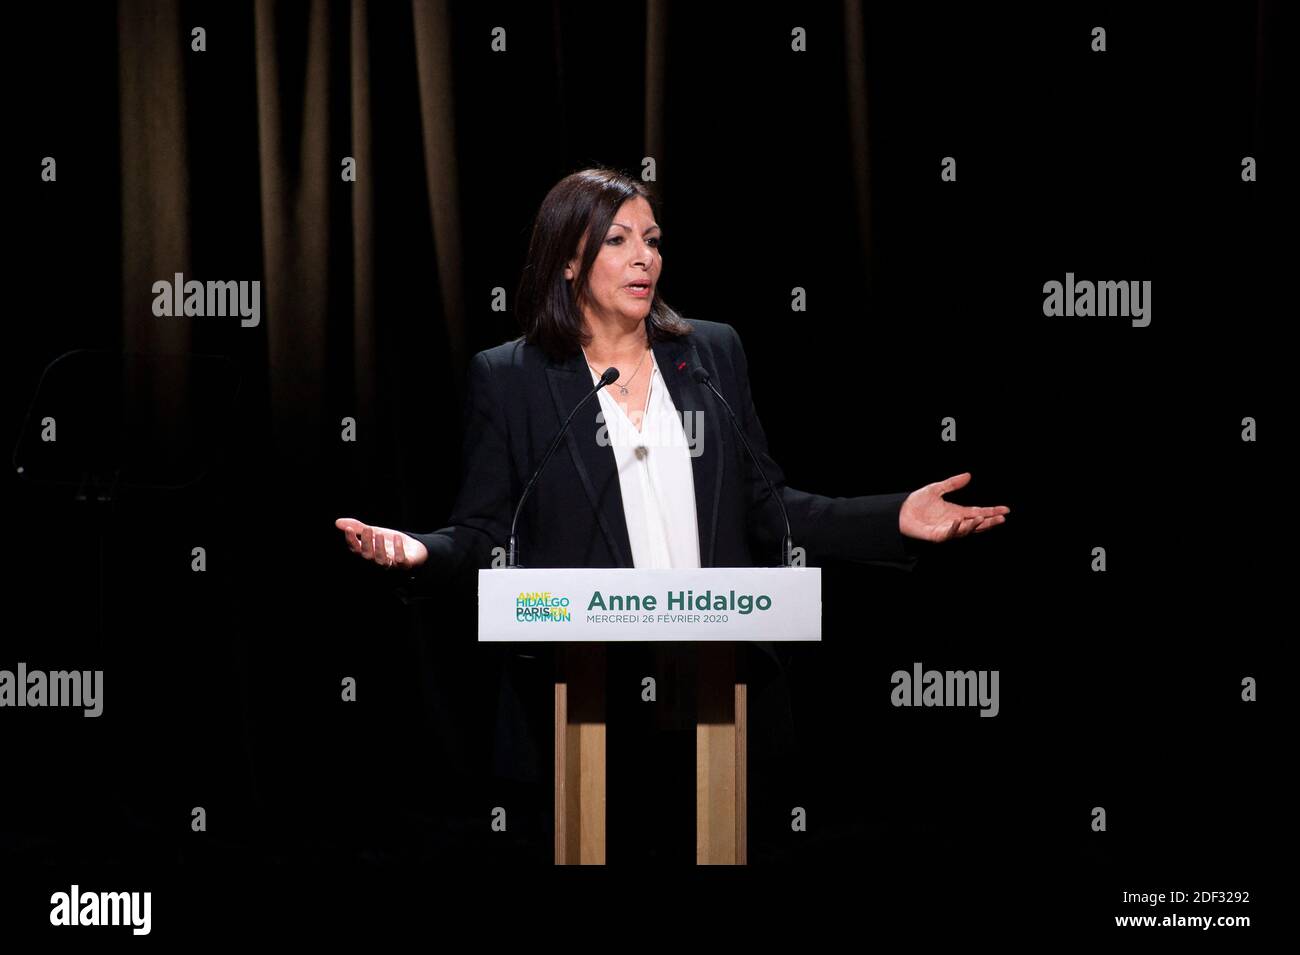 Paris Mayor and candidate for re-election Anne Hidalgo gestures as she delivers a speech during a campaign meeting at the Elysee Montmartre venue in Paris, on February 26, 2020, ahead of March 2020 mayoral elections in France. Photo by Eliot Blondet/ABACAPRESS.COM Stock Photo